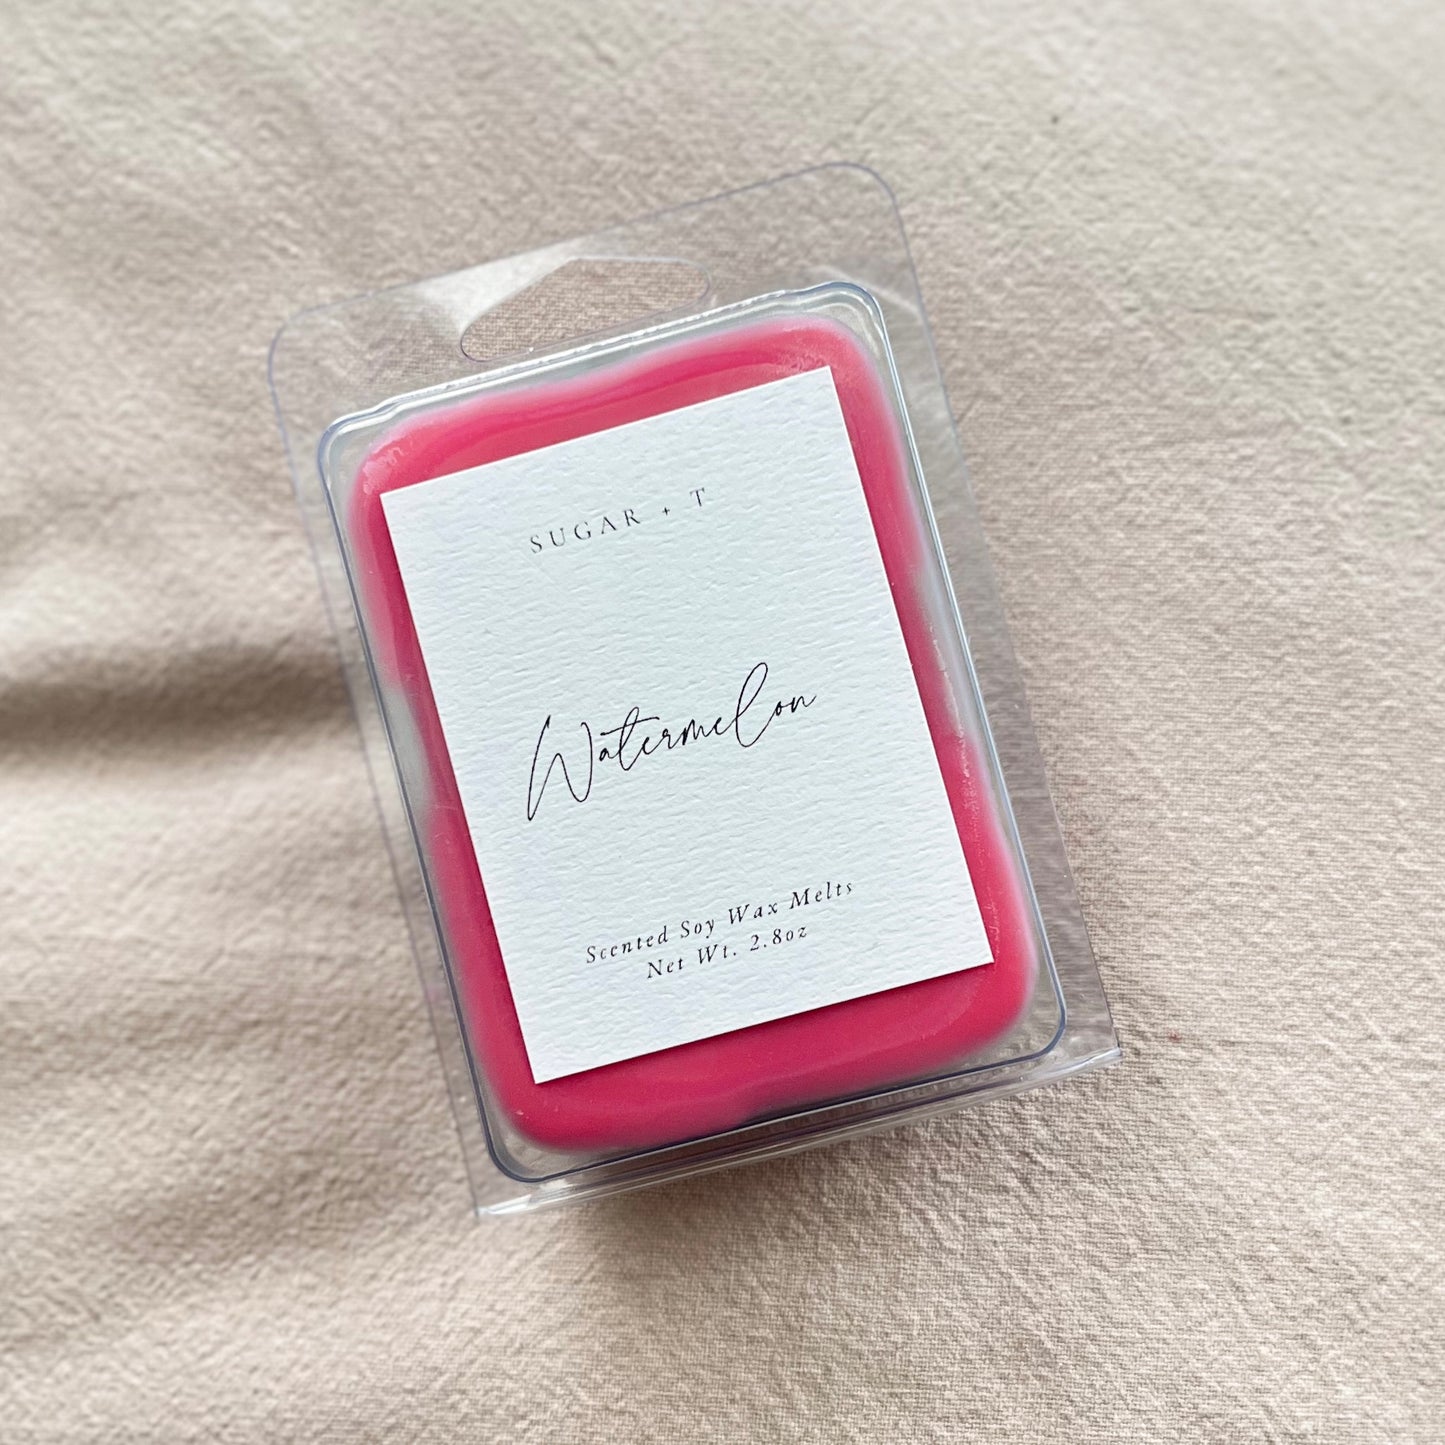 Watermelon Scented Wax Melts